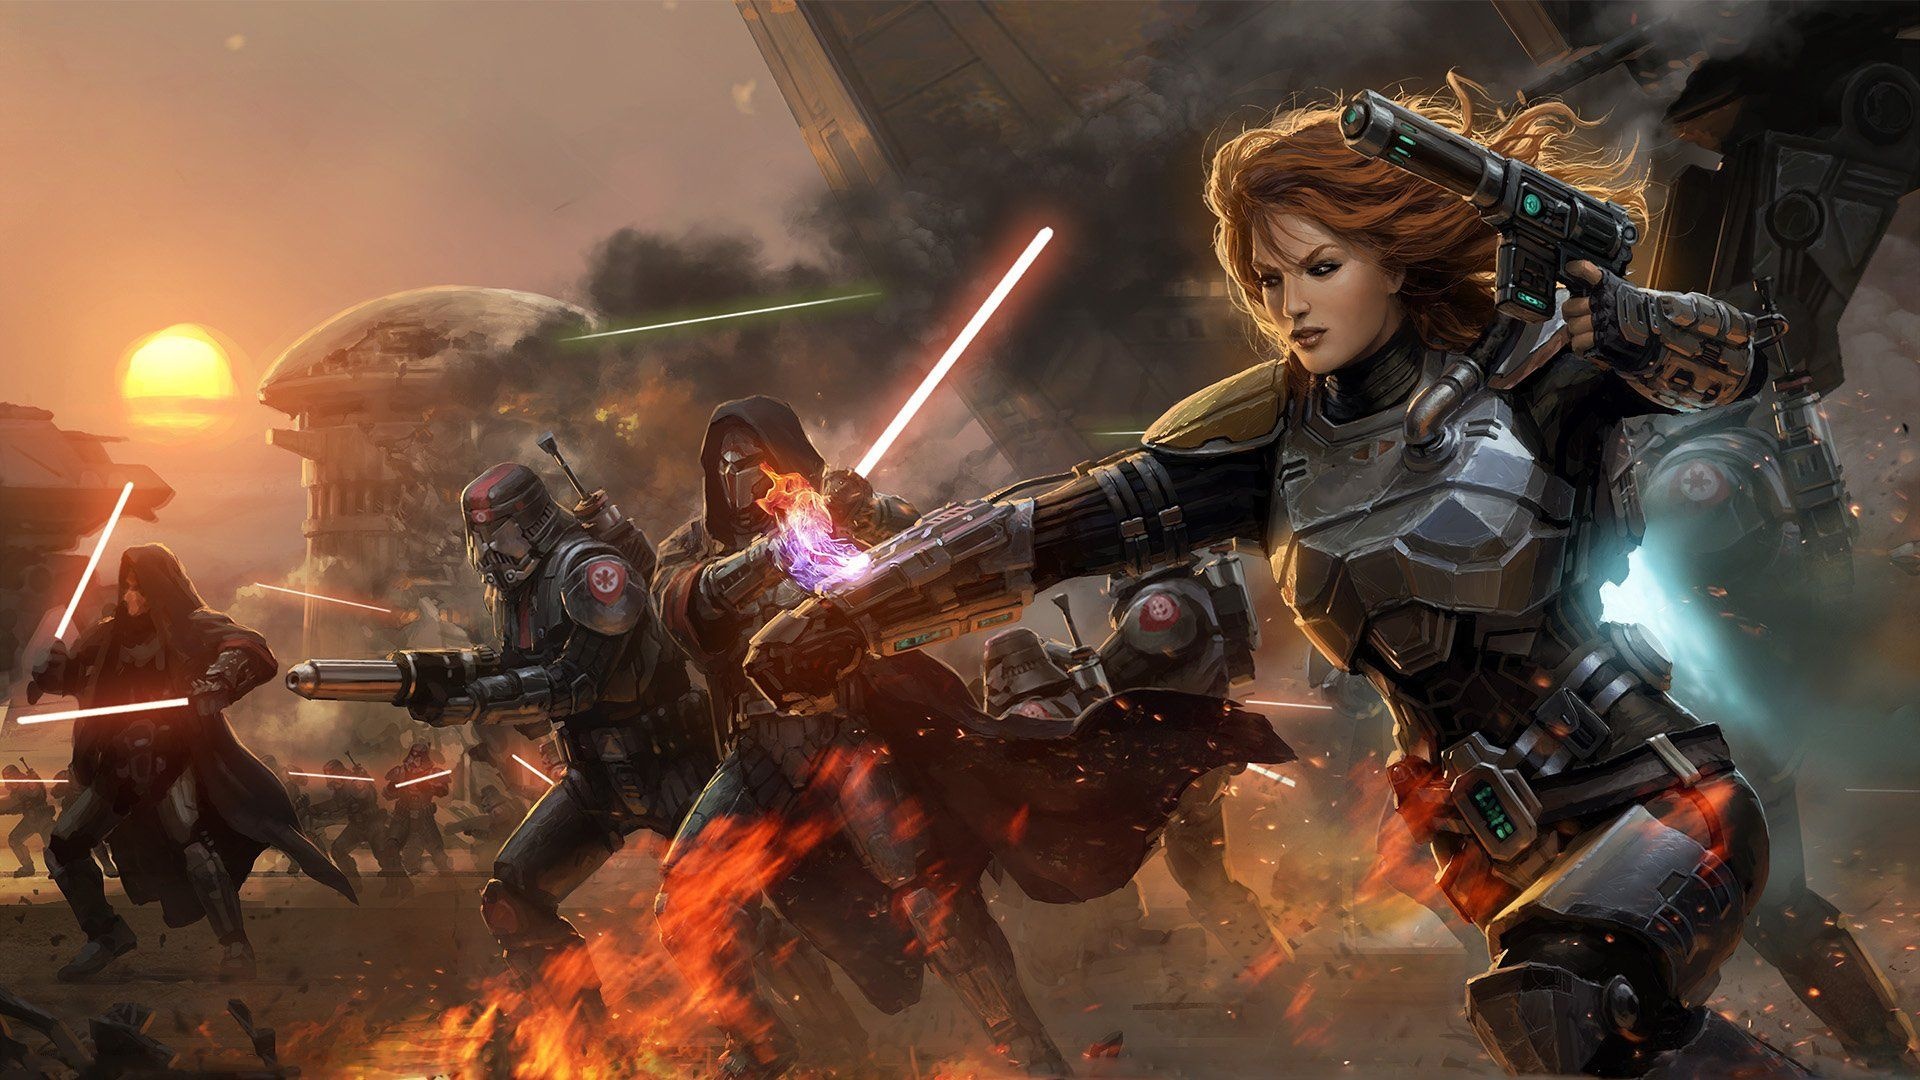 Shadows of the Force, The Old Republic ideas, Star Wars art, Force-sensitive characters, 1920x1080 Full HD Desktop